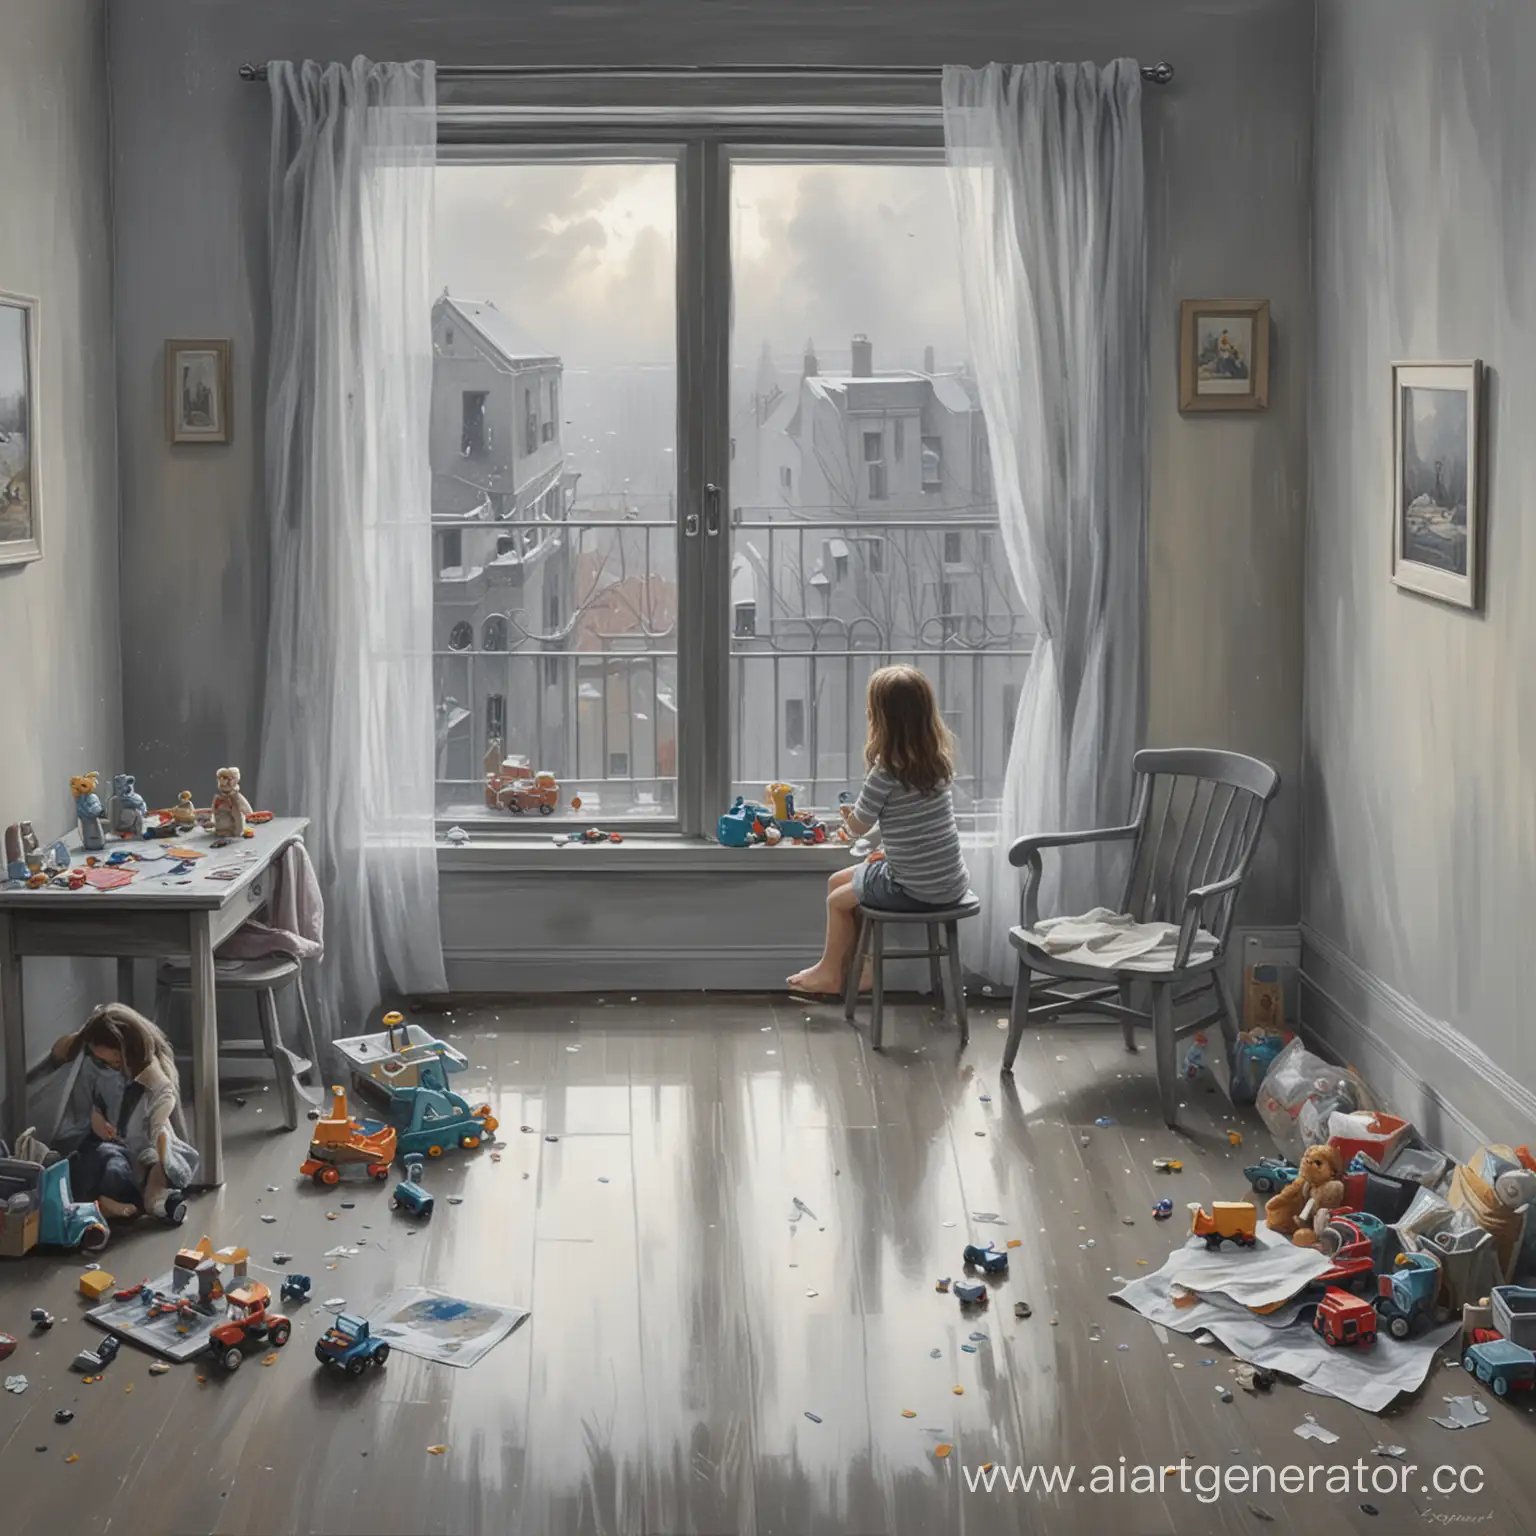 Lonely-Girl-Sitting-by-Window-in-a-Childs-Room-with-Scattered-Toys